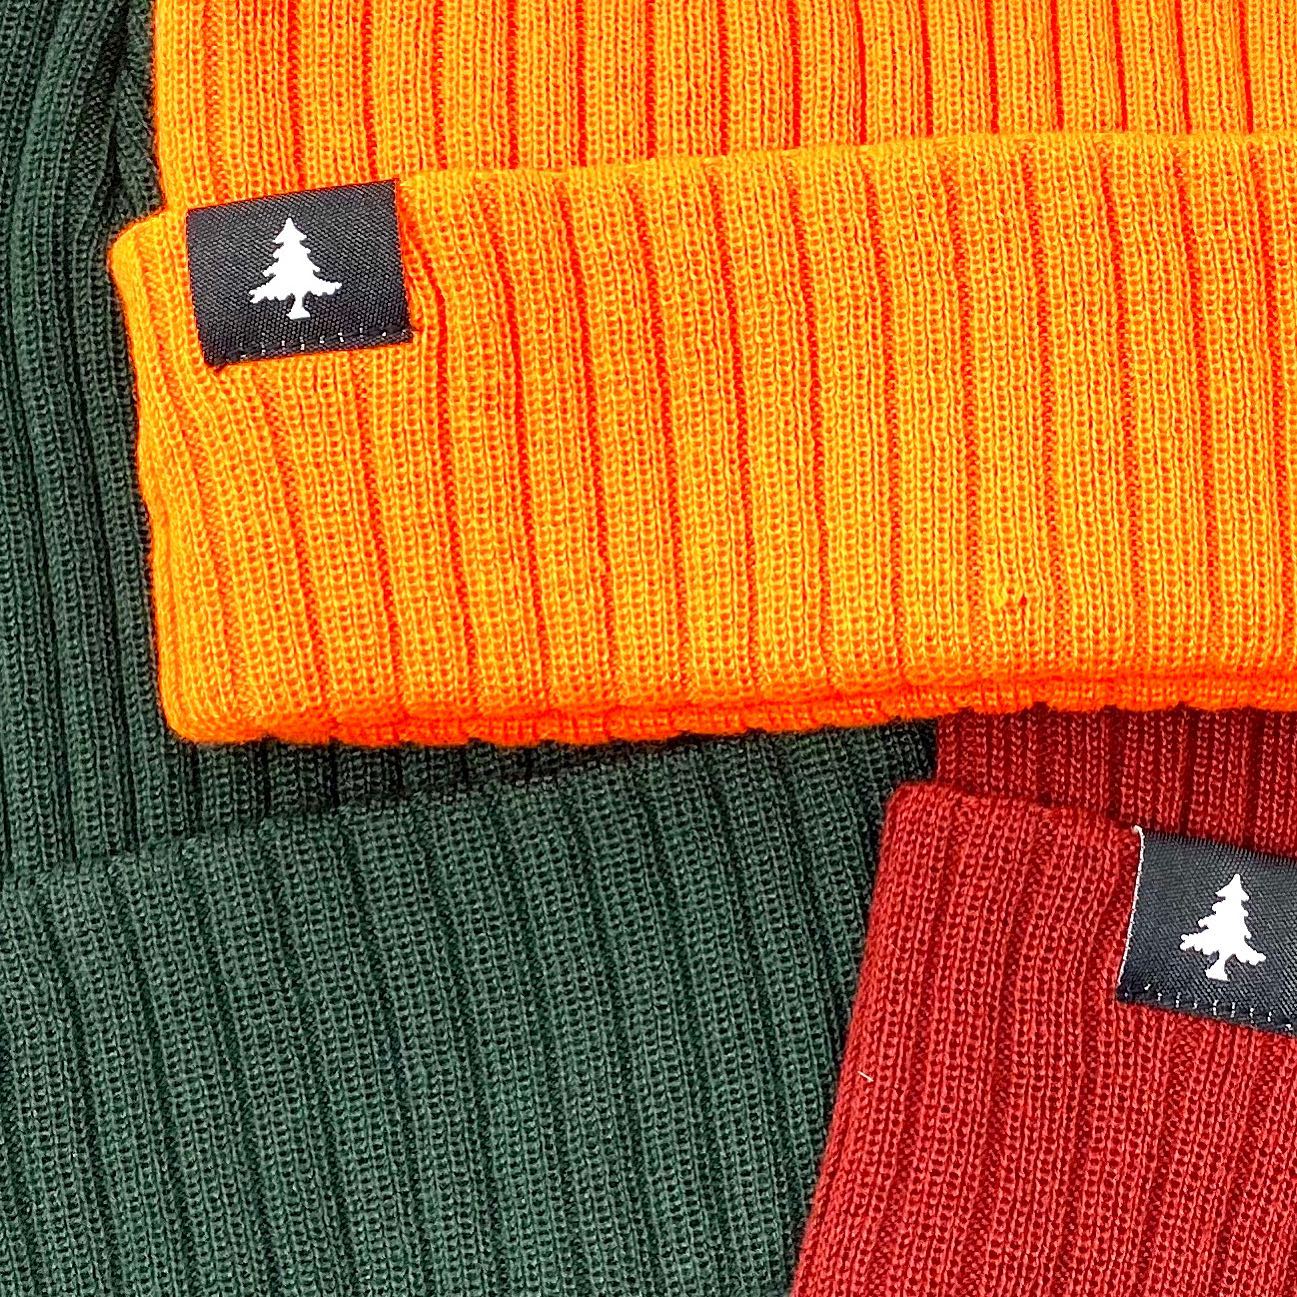 Endurance Threads Beanies with a Happy Little Tree